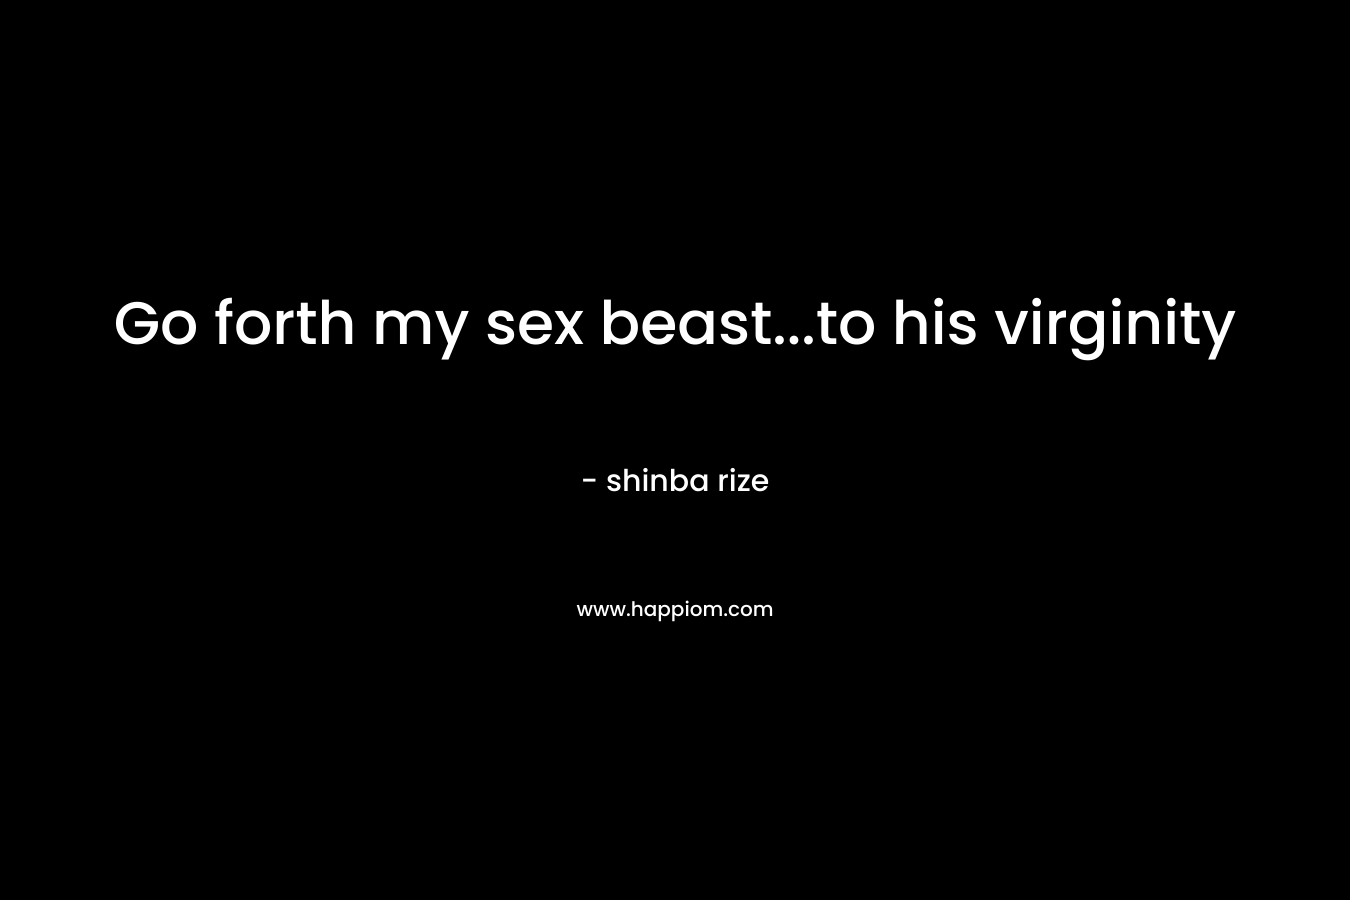 Go forth my sex beast...to his virginity